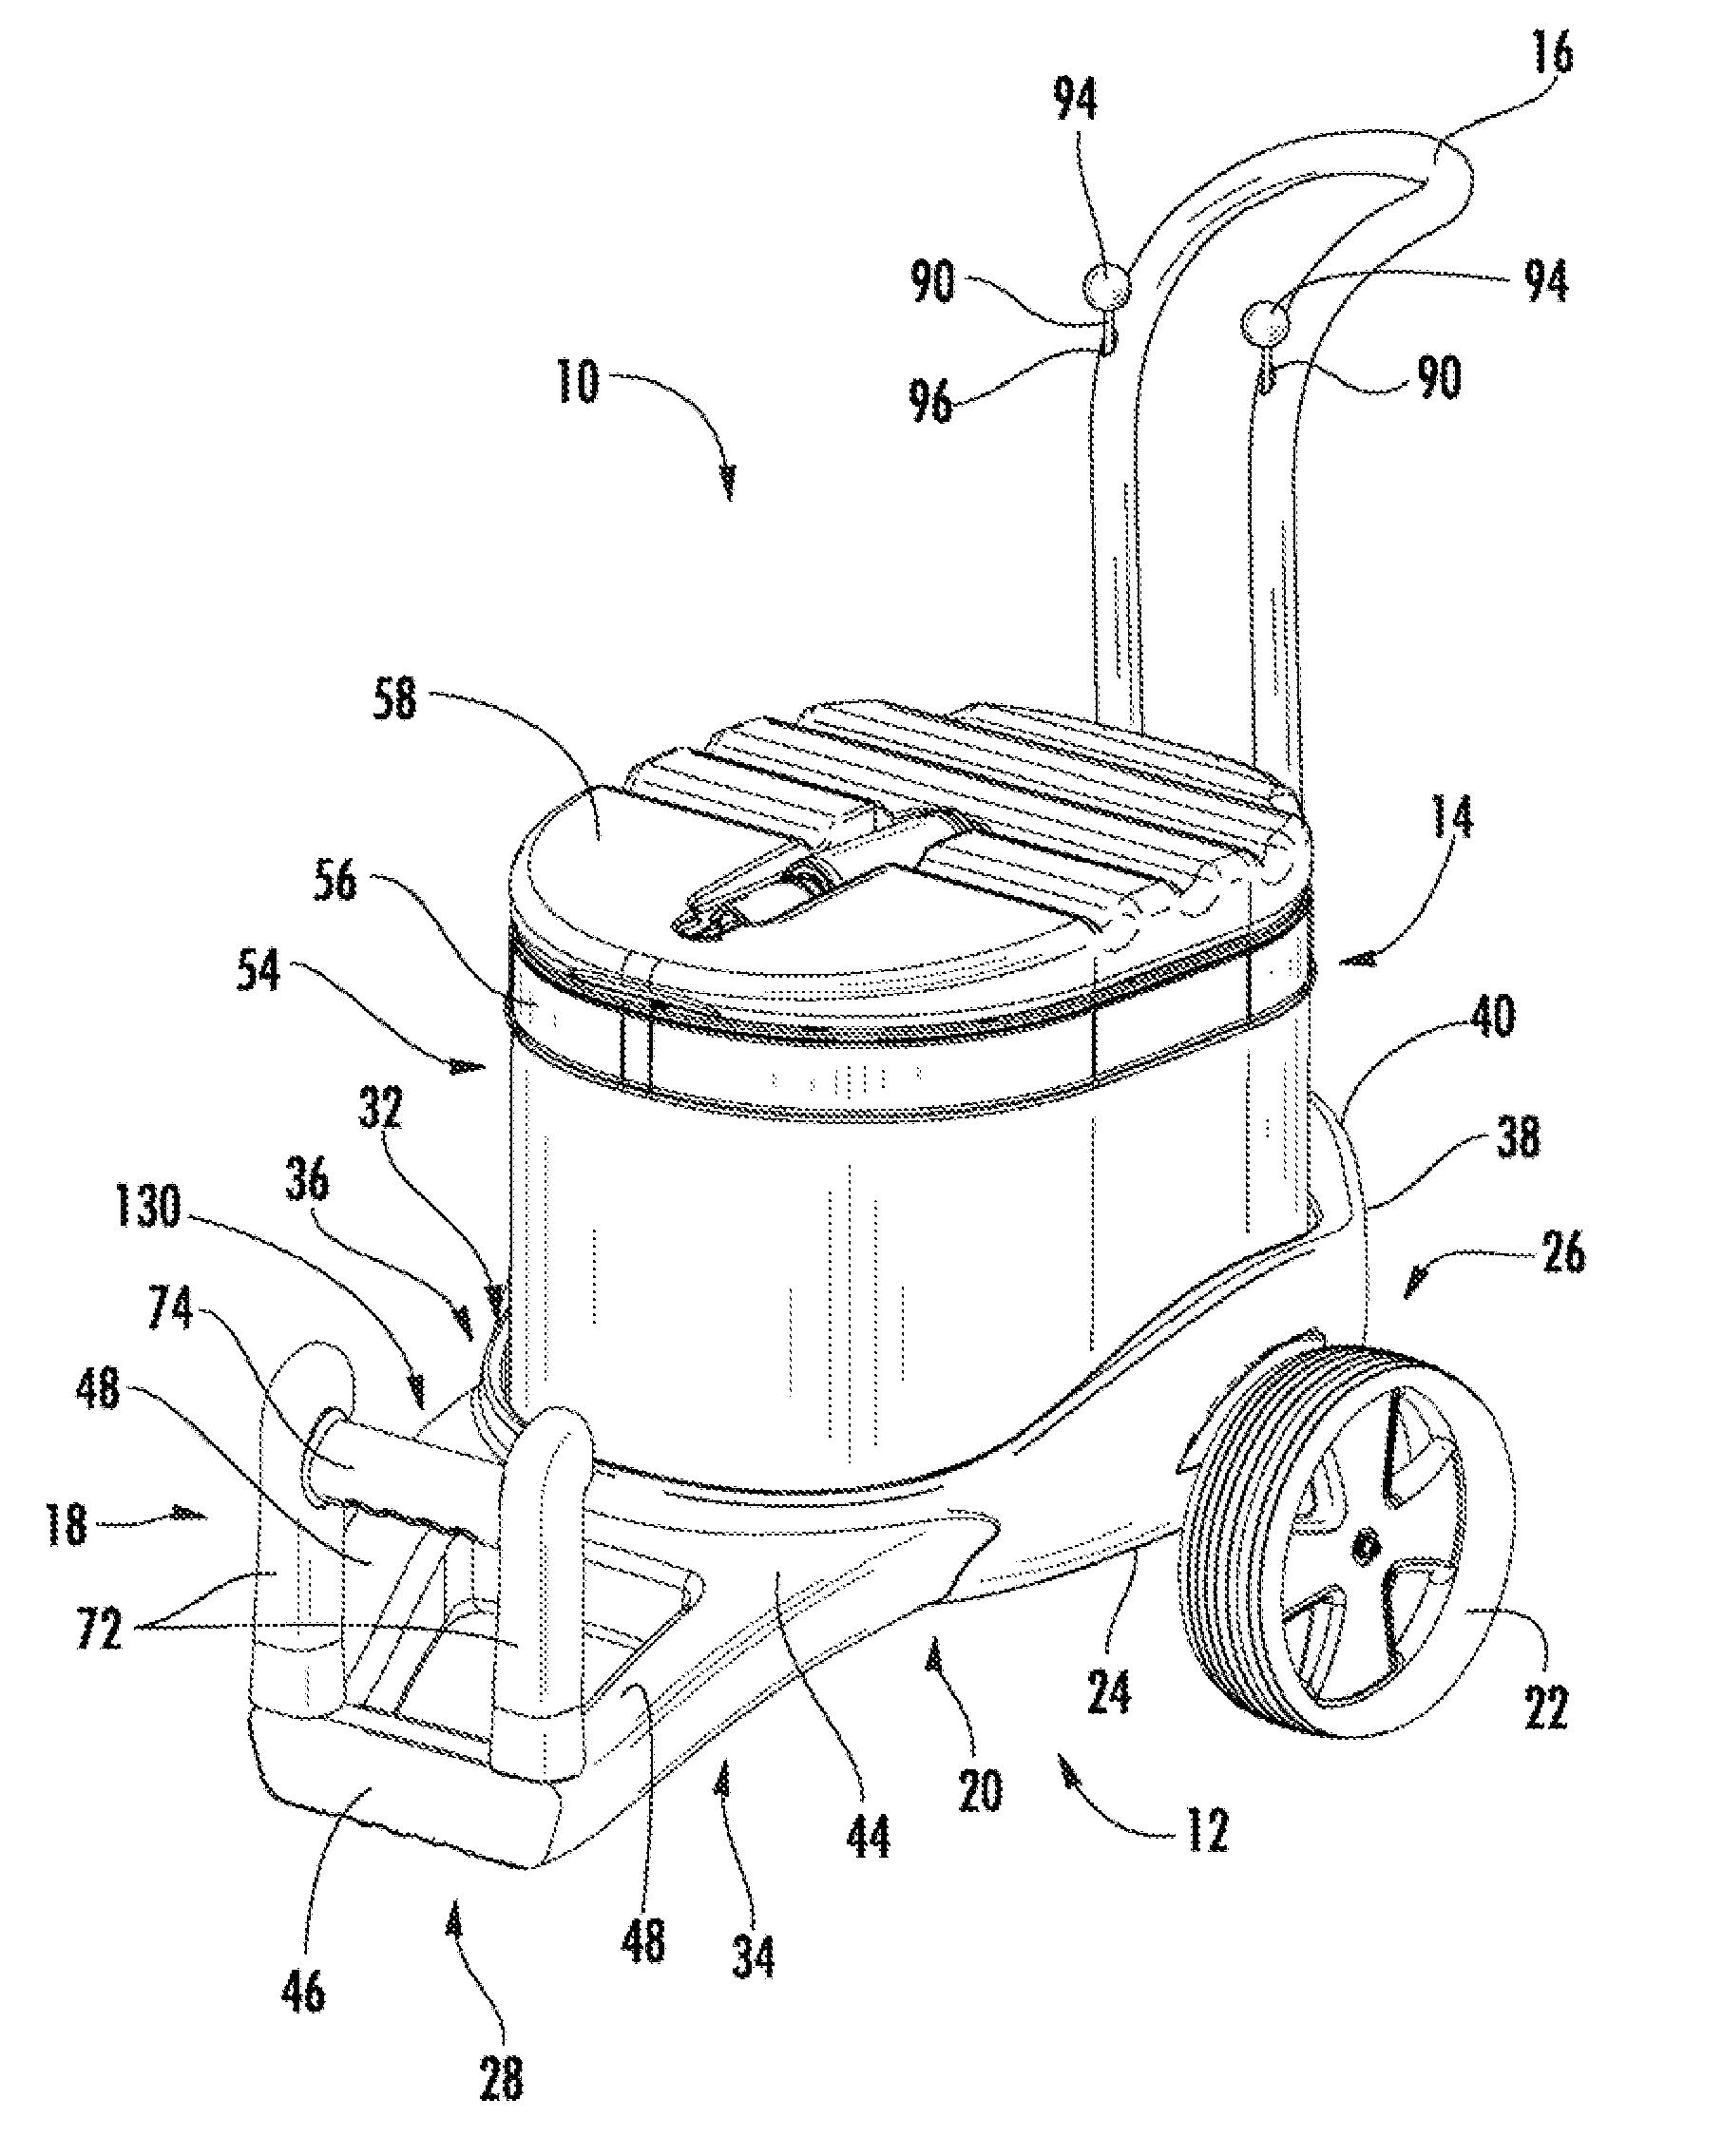 Travel cooler with air pump receiving area